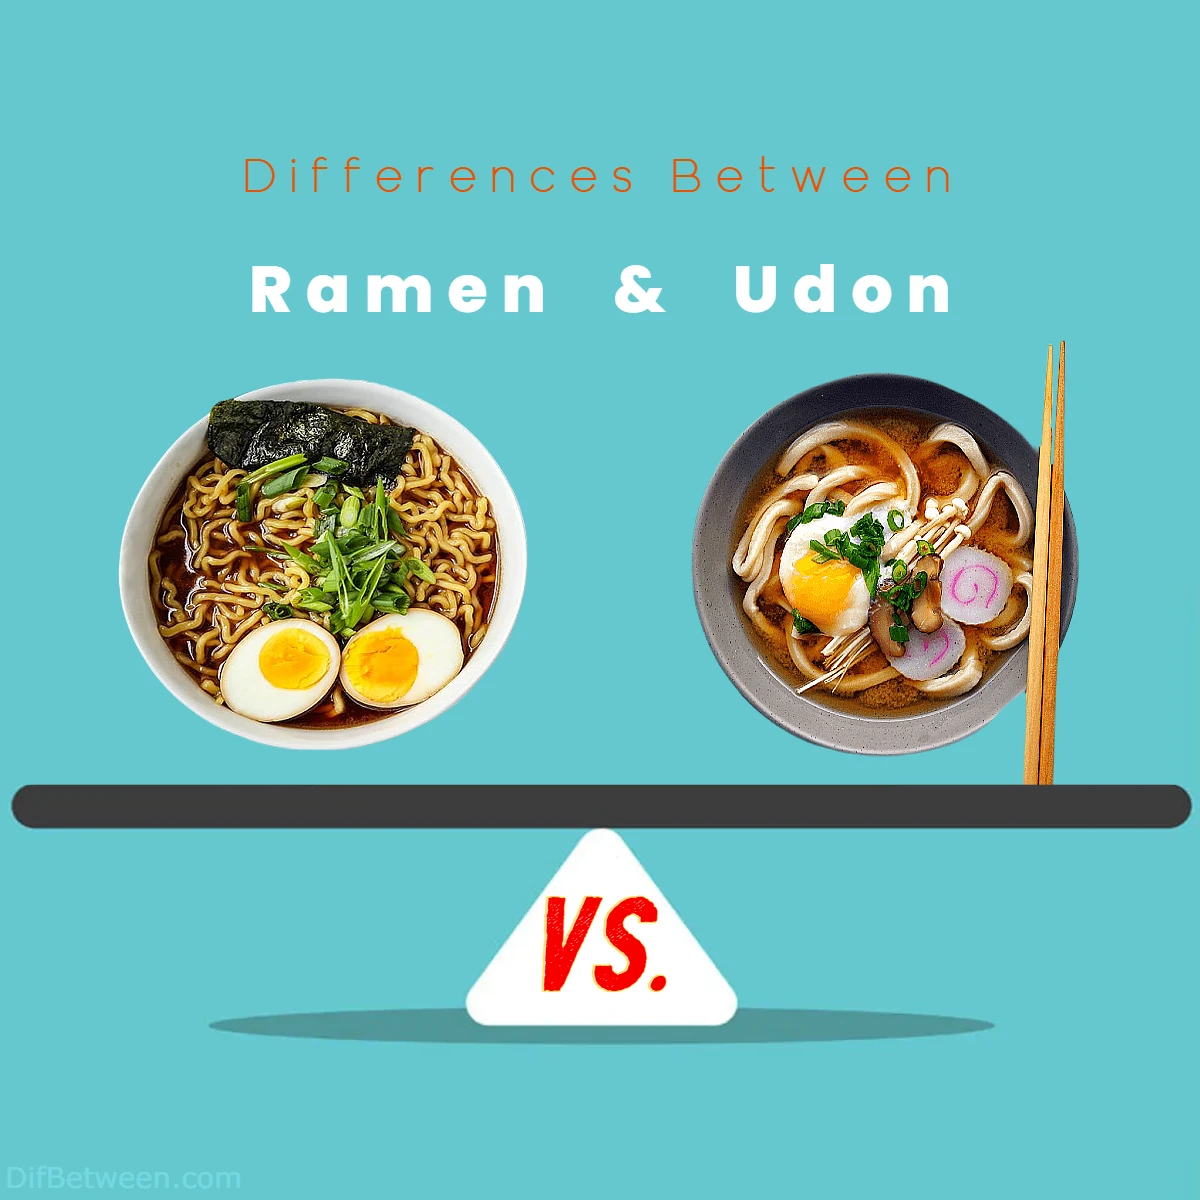 Differences Between Ramen vs Udon